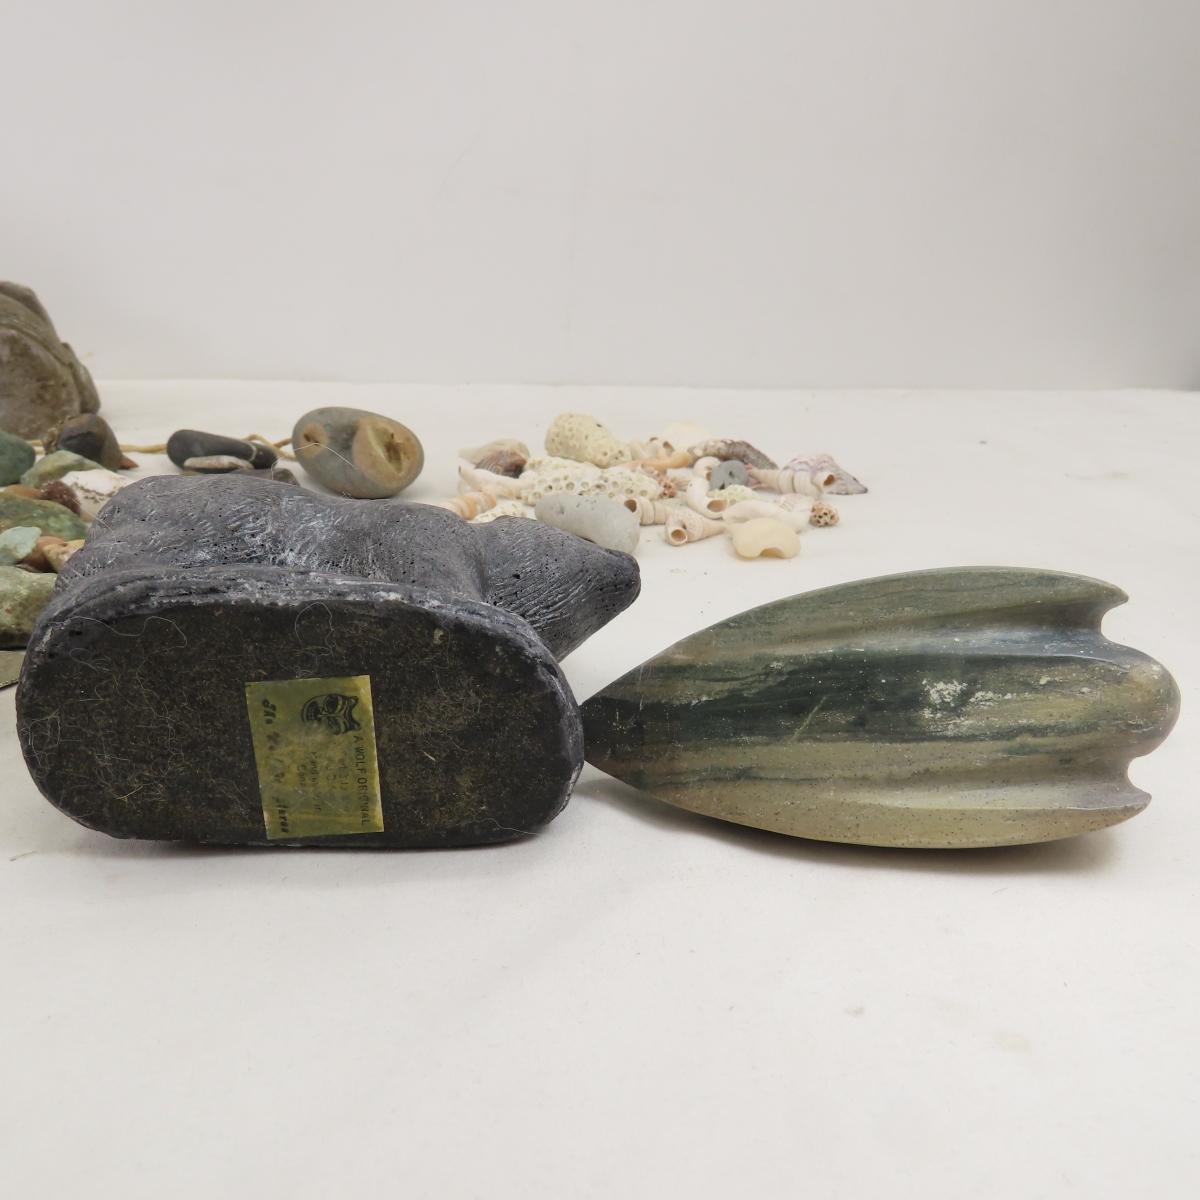 Stones, Fossils, Arrowhead and Stone Figures